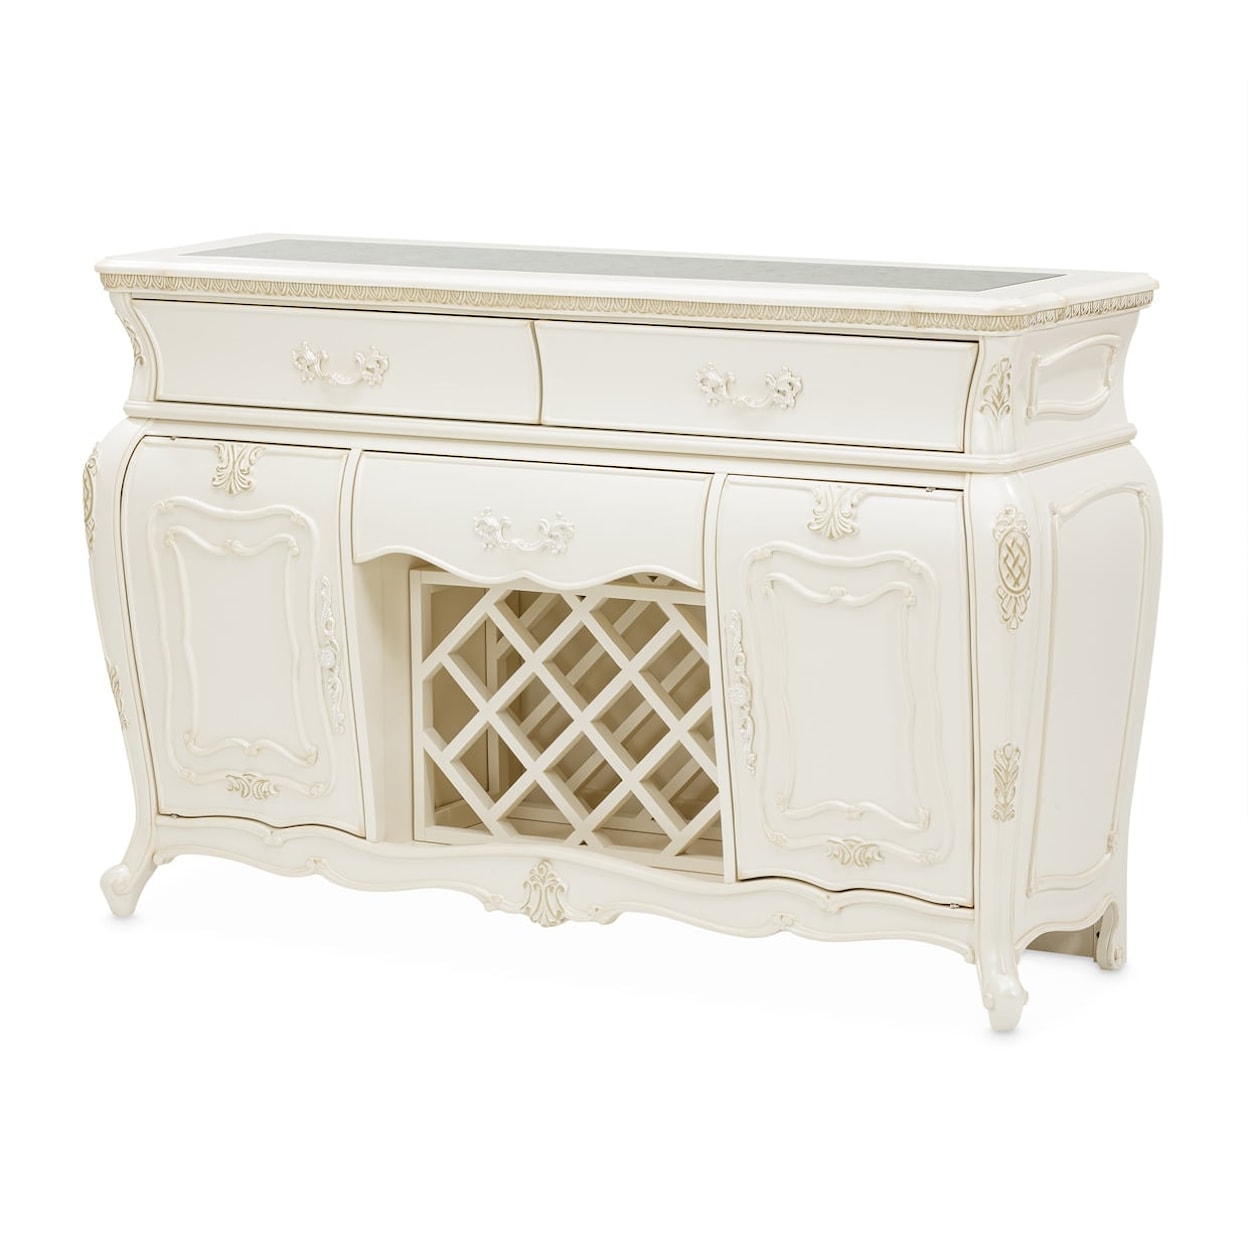 Michael Amini Lavelle Classic Pearl 3-Drawer Sideboard